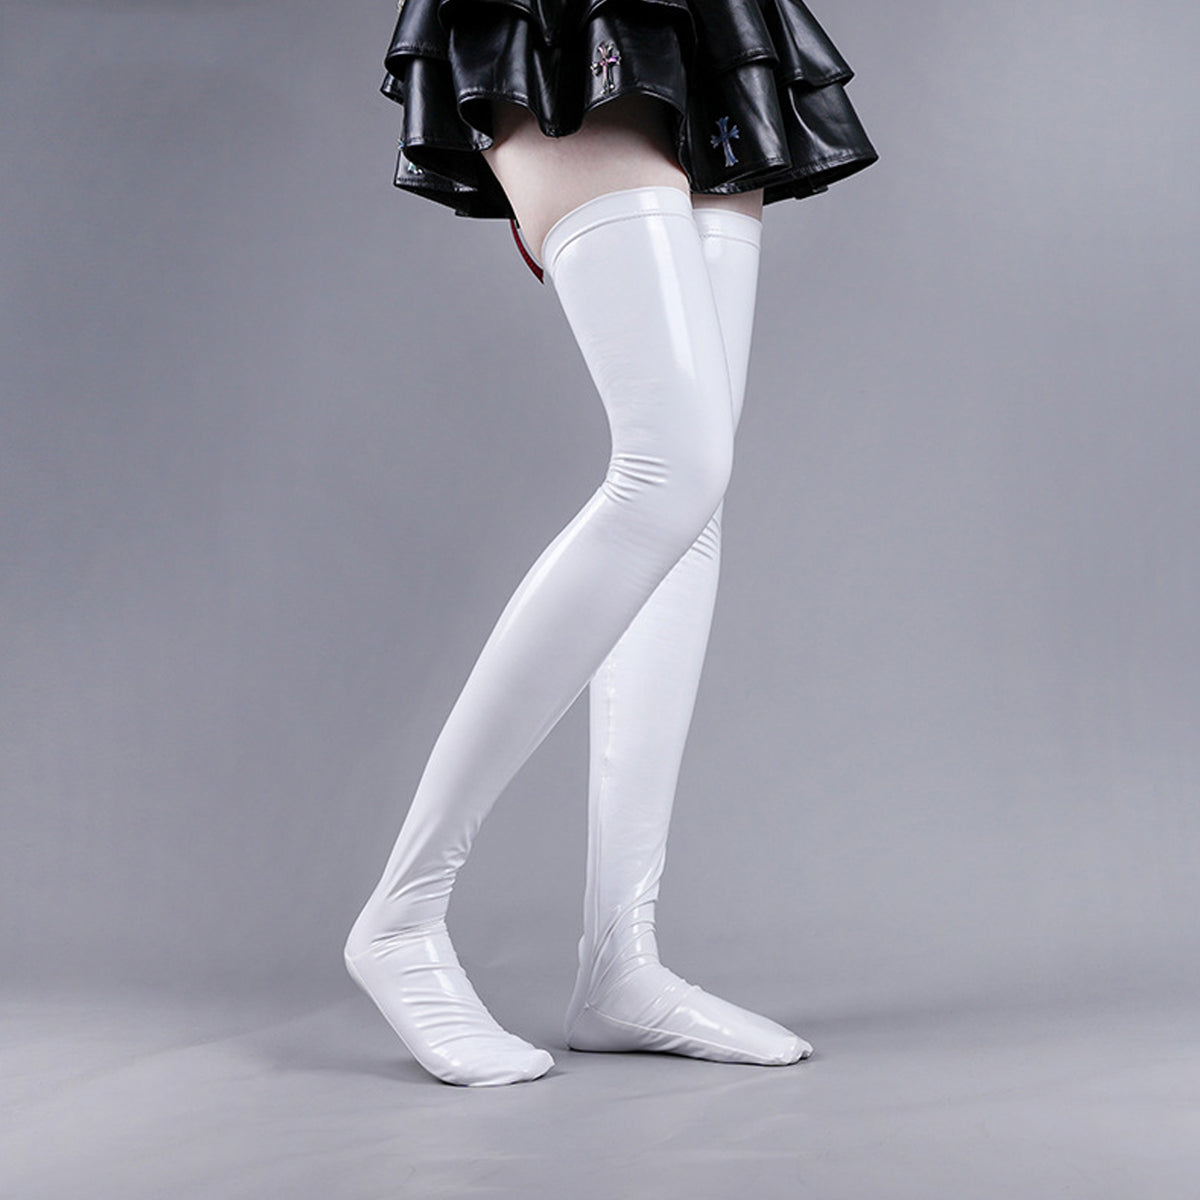 Cute Latex Thigh High Stocking 2 Color Shiny Faux Leather Cat Paw Thigh  High Socks